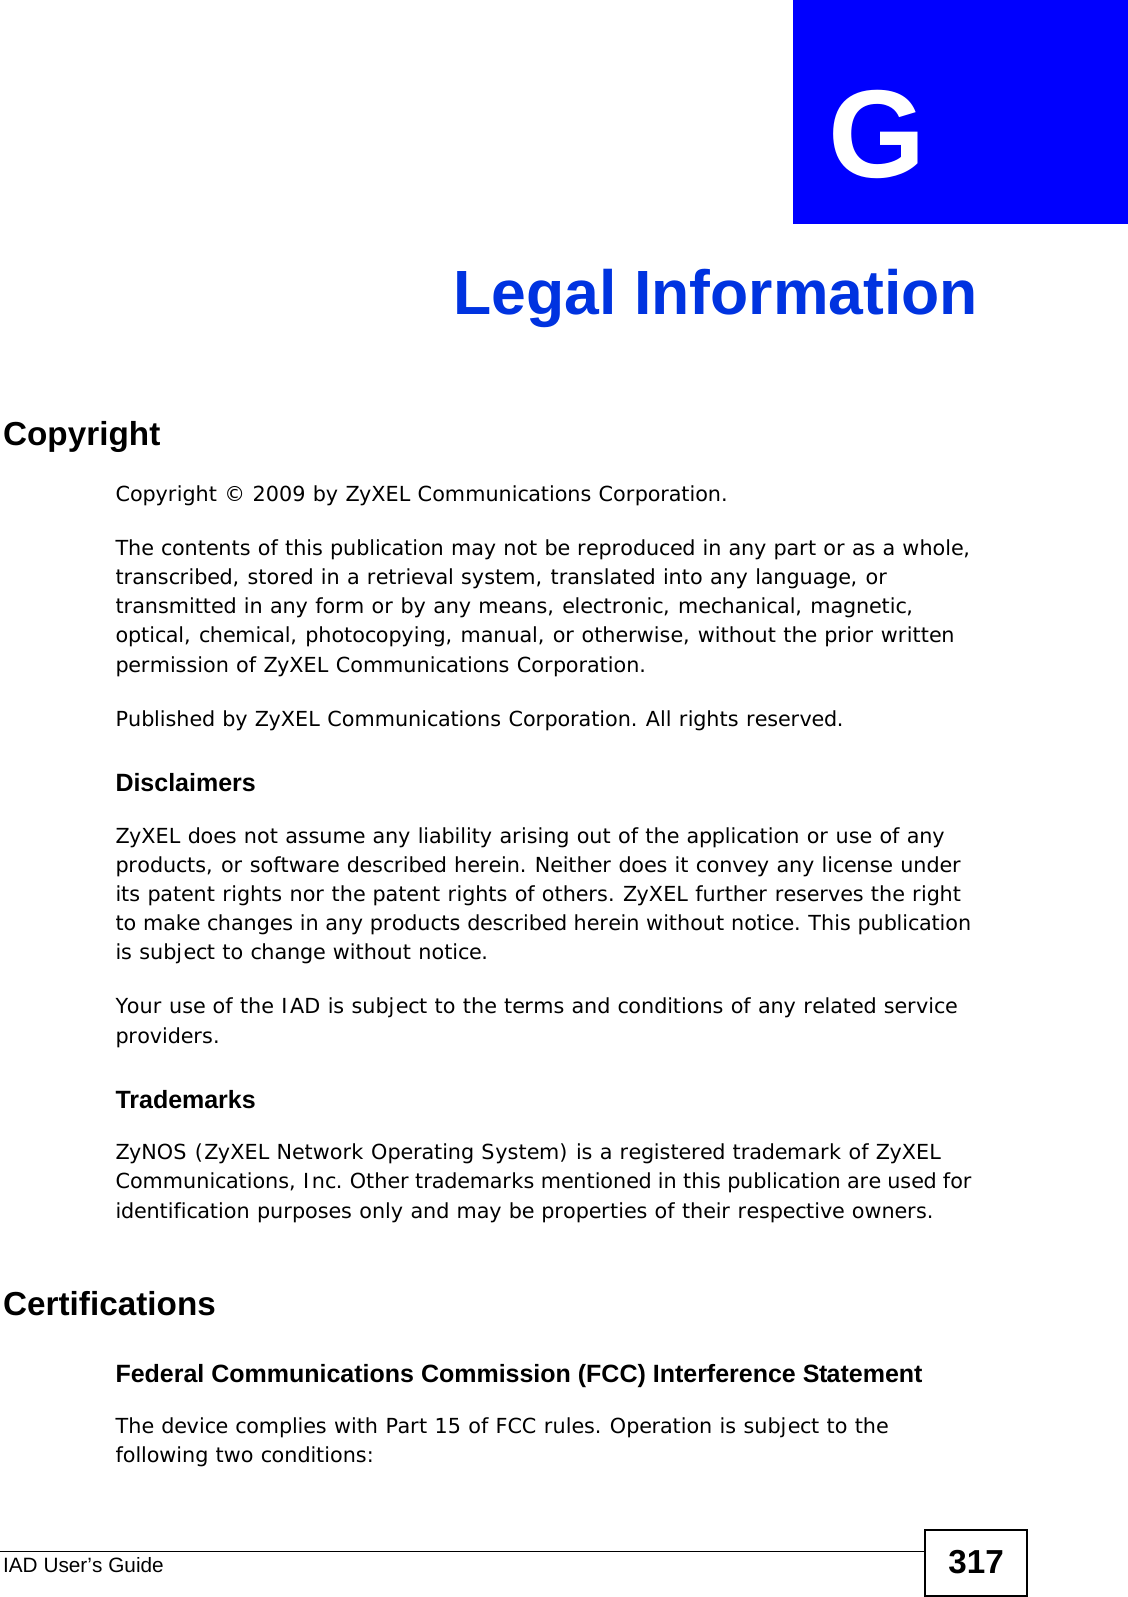 IAD User’s Guide 317APPENDIX  G Legal InformationCopyrightCopyright © 2009 by ZyXEL Communications Corporation.The contents of this publication may not be reproduced in any part or as a whole, transcribed, stored in a retrieval system, translated into any language, or transmitted in any form or by any means, electronic, mechanical, magnetic, optical, chemical, photocopying, manual, or otherwise, without the prior written permission of ZyXEL Communications Corporation.Published by ZyXEL Communications Corporation. All rights reserved.DisclaimersZyXEL does not assume any liability arising out of the application or use of any products, or software described herein. Neither does it convey any license under its patent rights nor the patent rights of others. ZyXEL further reserves the right to make changes in any products described herein without notice. This publication is subject to change without notice.Your use of the IAD is subject to the terms and conditions of any related service providers. TrademarksZyNOS (ZyXEL Network Operating System) is a registered trademark of ZyXEL Communications, Inc. Other trademarks mentioned in this publication are used for identification purposes only and may be properties of their respective owners.CertificationsFederal Communications Commission (FCC) Interference StatementThe device complies with Part 15 of FCC rules. Operation is subject to the following two conditions: